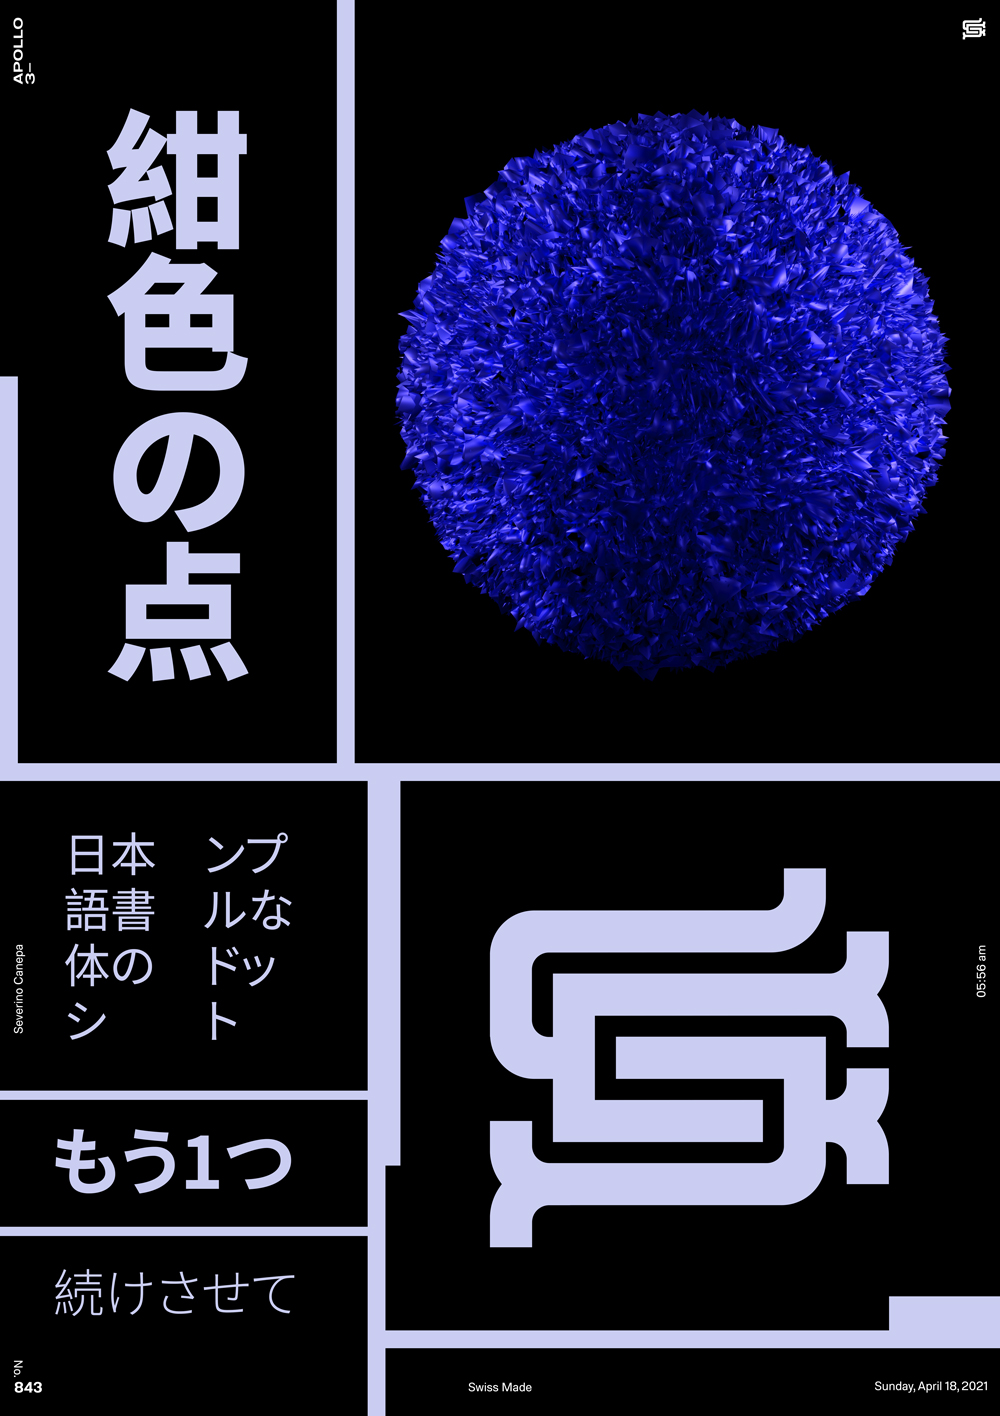 Visual creation made with the new SC monogram, the 3D shape, and the Japanese typography